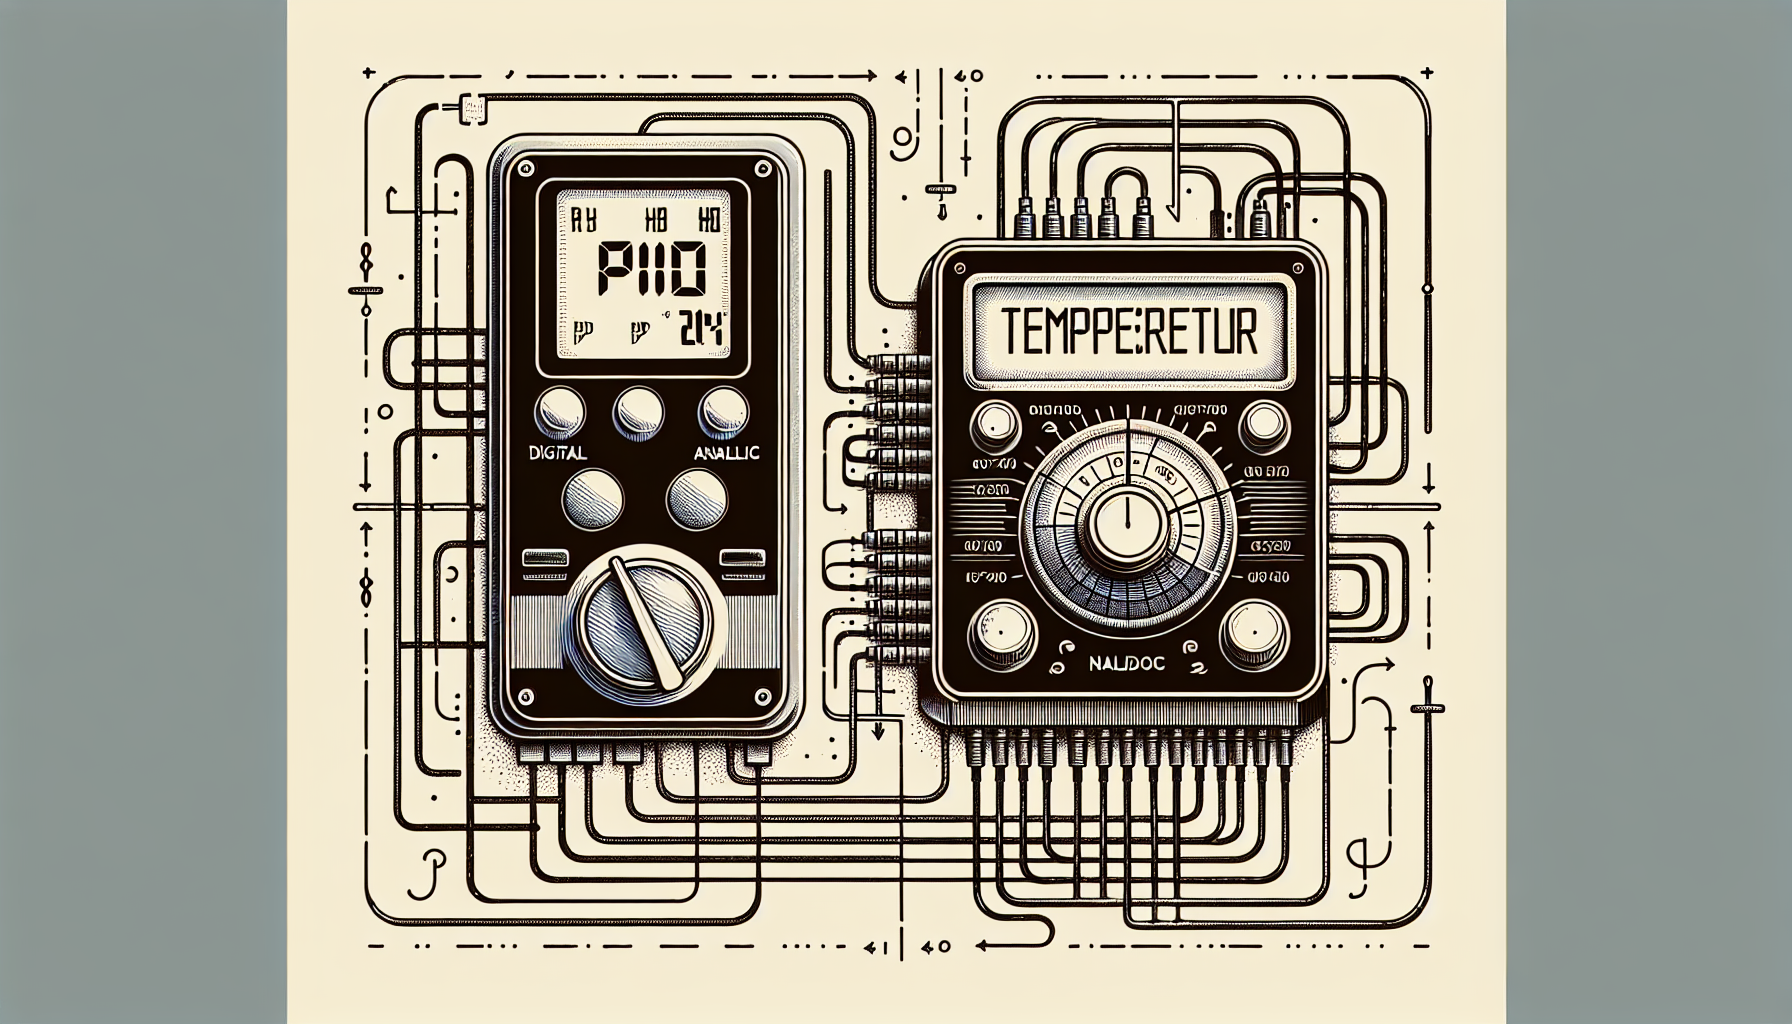 Comparison between digital and analog PID temperature controllers